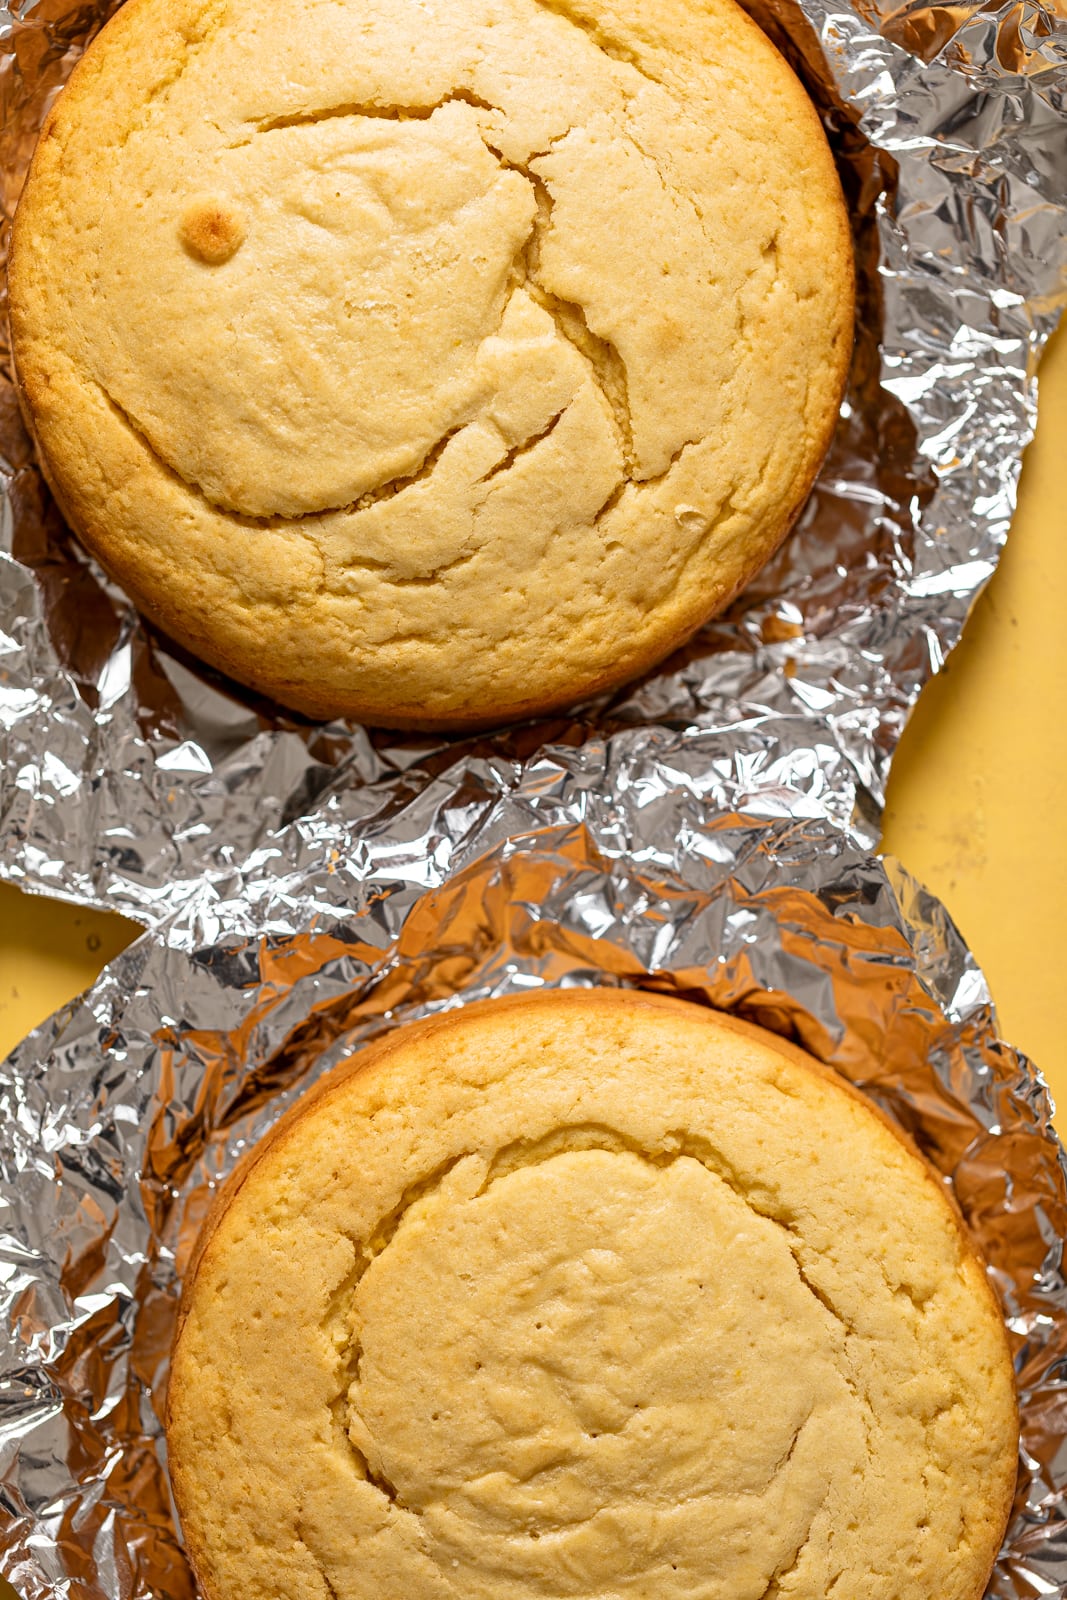 Two round Cakes on aluminum foil